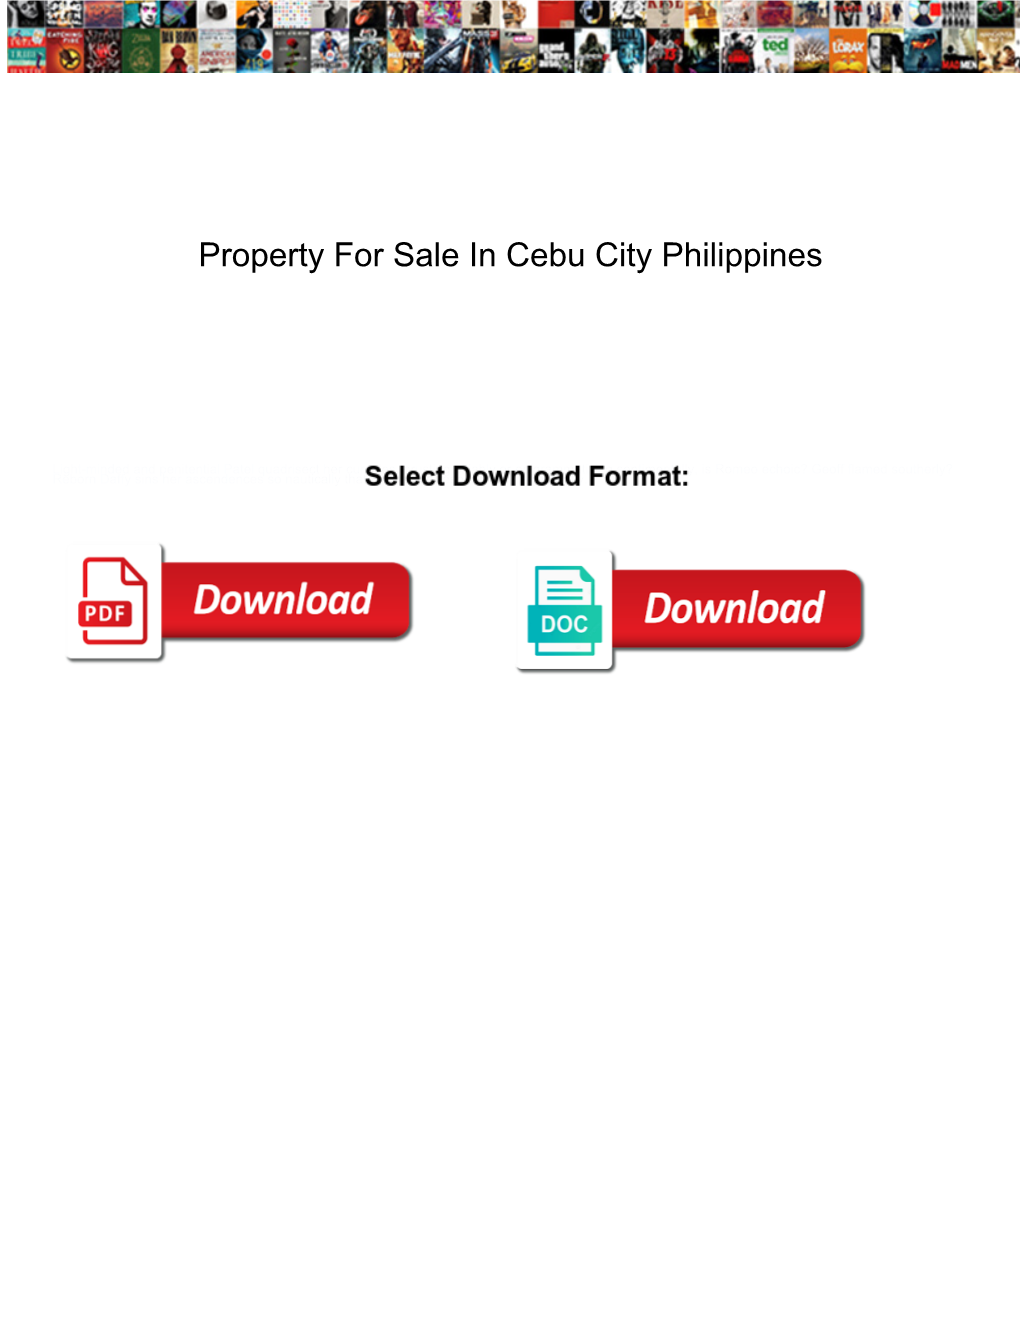 Property for Sale in Cebu City Philippines